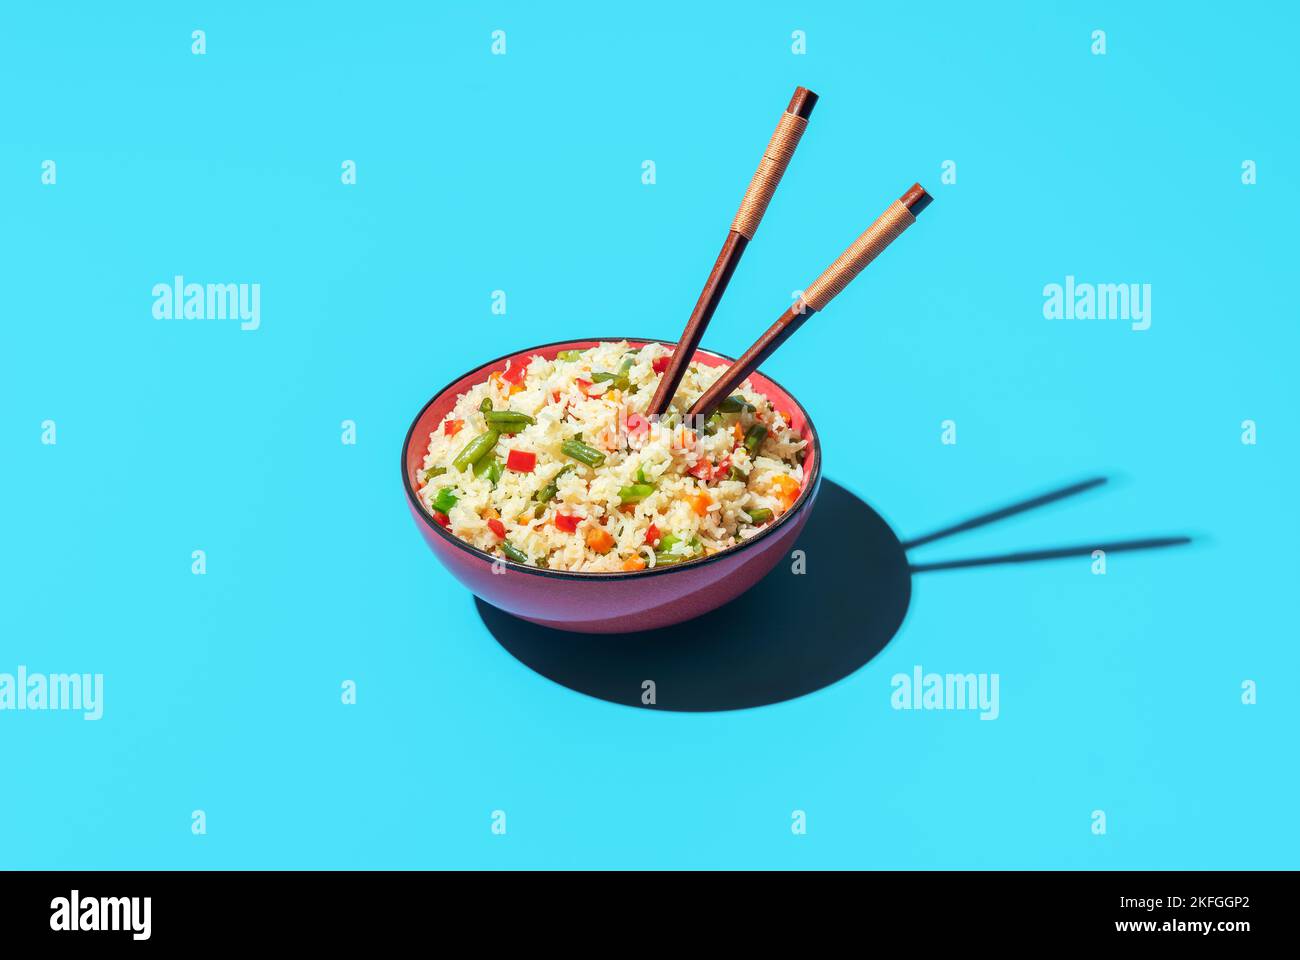 Fried rice with vegetables in a red bowl with chopsticks minimalist on a blue table. Delicious asian dish, fried white rice with a mix of vegetables. Stock Photo